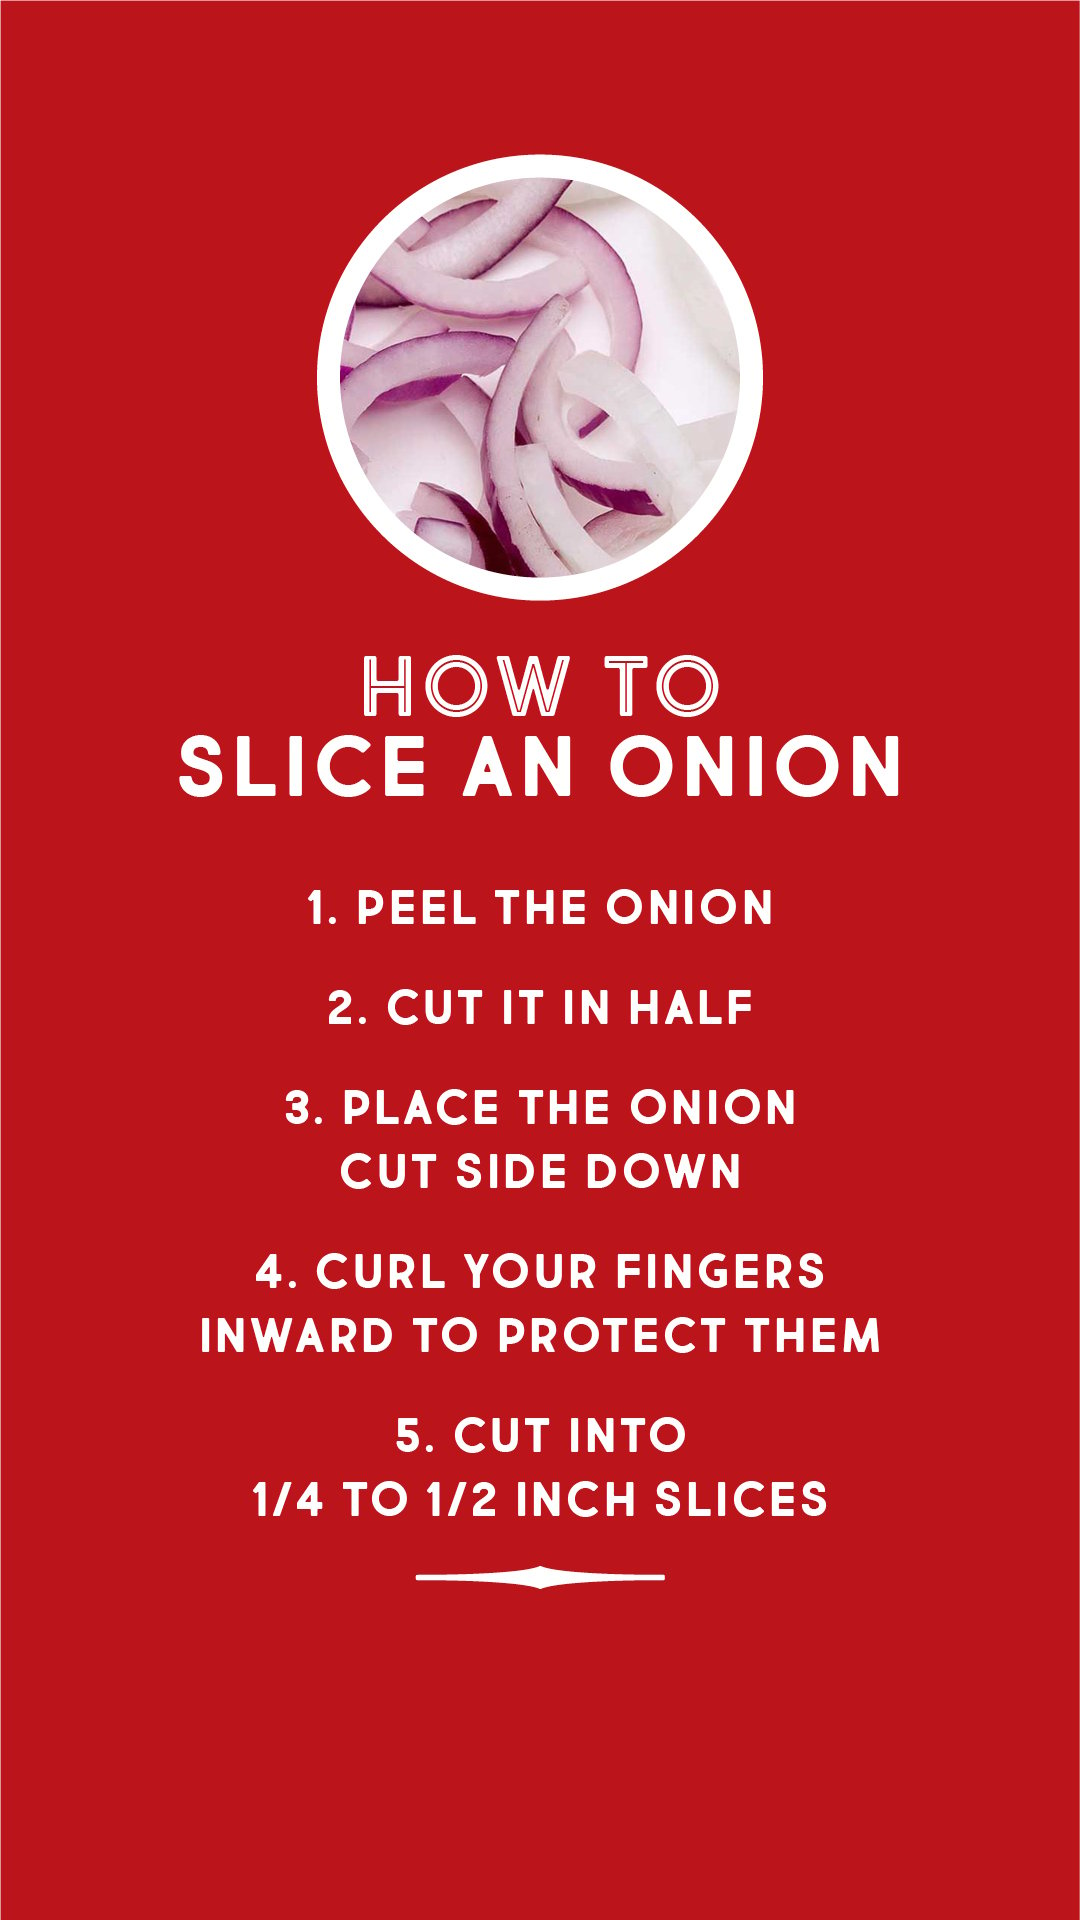 How to slice an onion